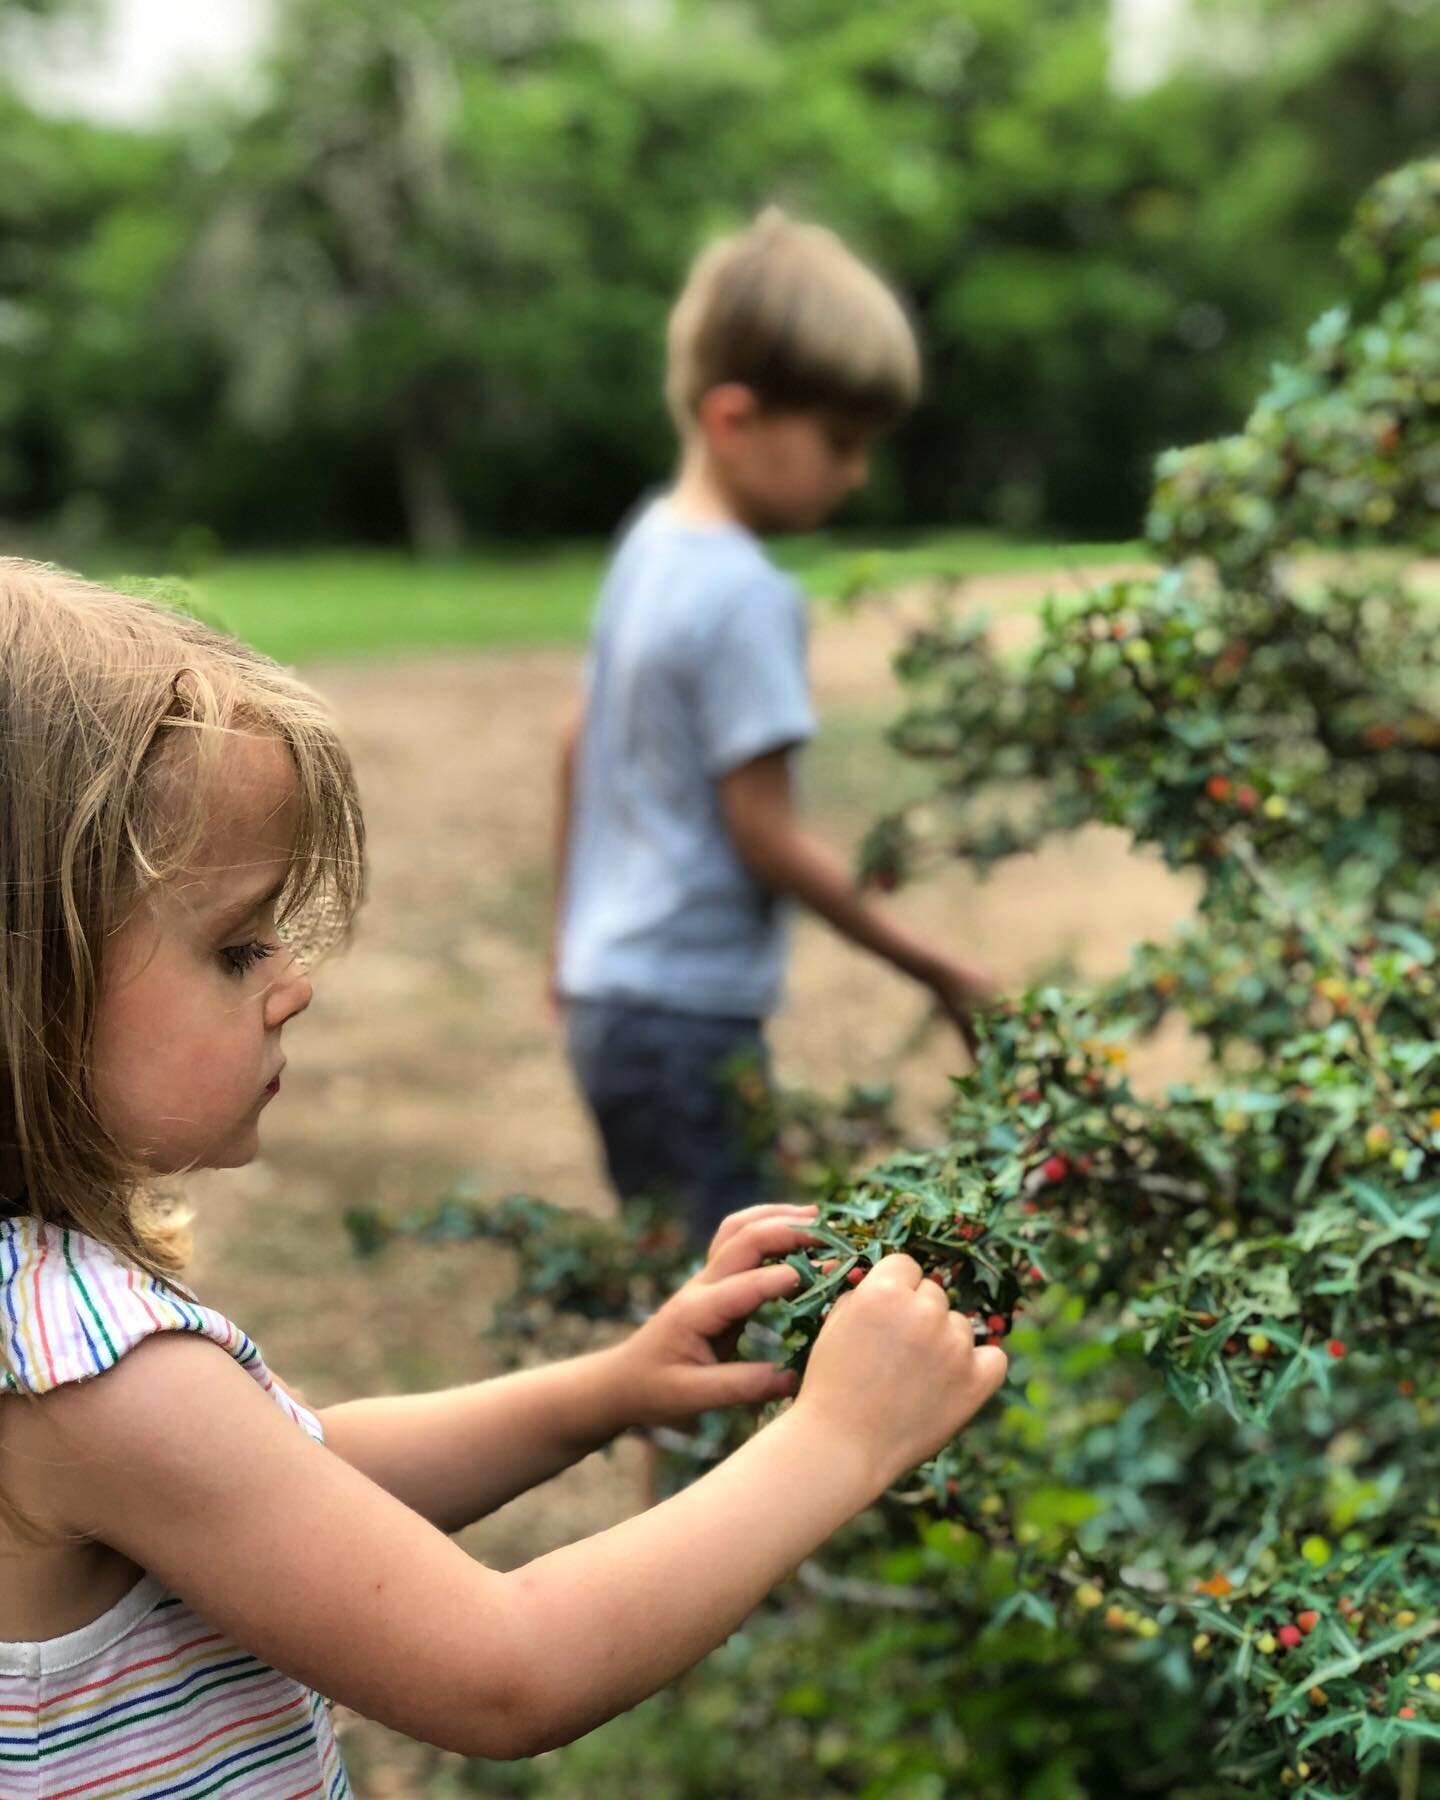 Pint for a Pint!  Today kicks off our annual agarita berry picking season!

Pick a Pint of these native berries and receive a pint of beer.  Pro tip: dads love this event every year&hellip;little hands are great for picking!😎

These native shrubs ar